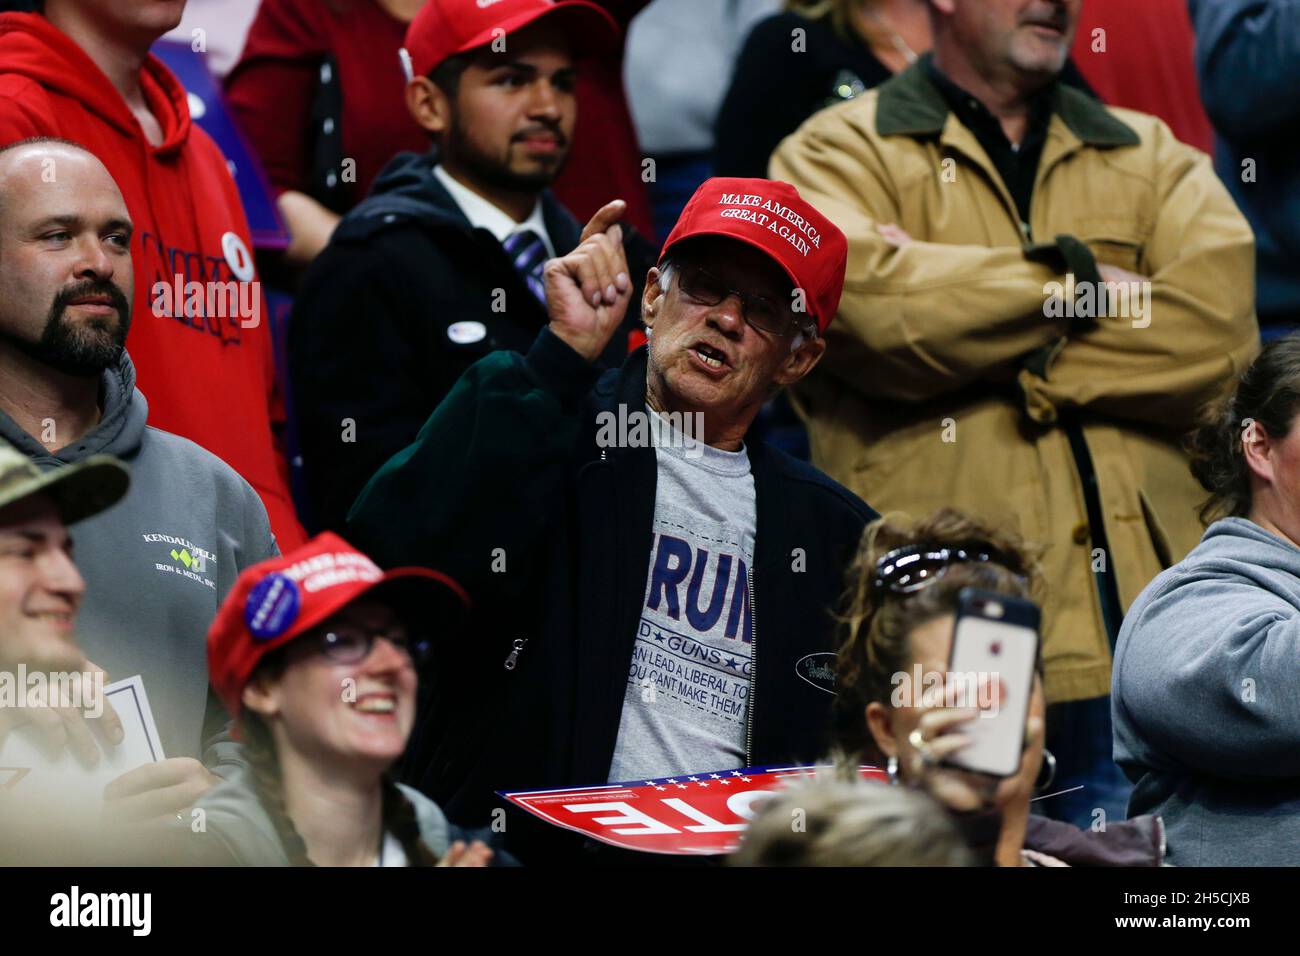 11052018 - Fort Wayne, Indiana, USA: Trump supporters show their anger and disdain towards the media and journalists as United States President Donald J. Trump campaigns for Indiana congressional candidates, including Mike Braun, who is running for senate, during a Make America Great Again! rally at the Allen County War Memorial Coliseum in Fort Wayne, Indiana. Stock Photo